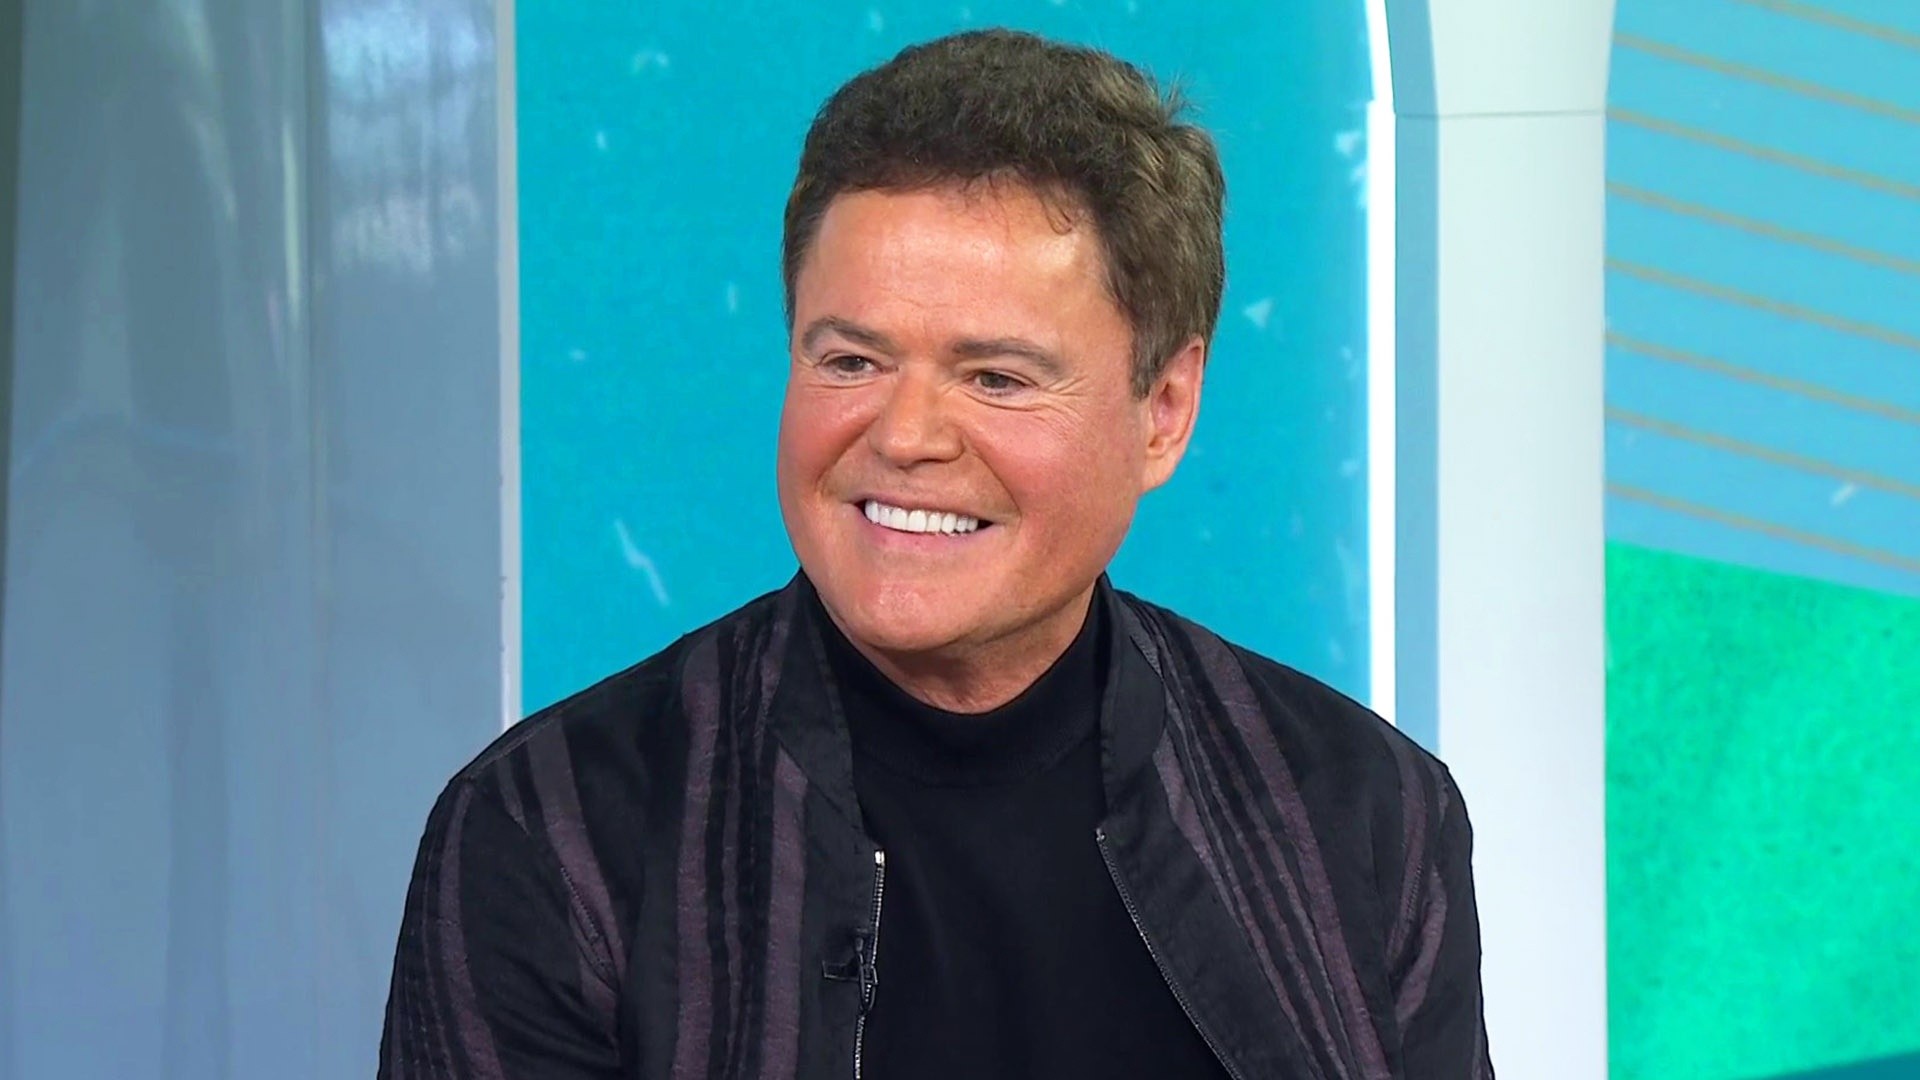 Watch Donny Osmond rap about his six-decade career